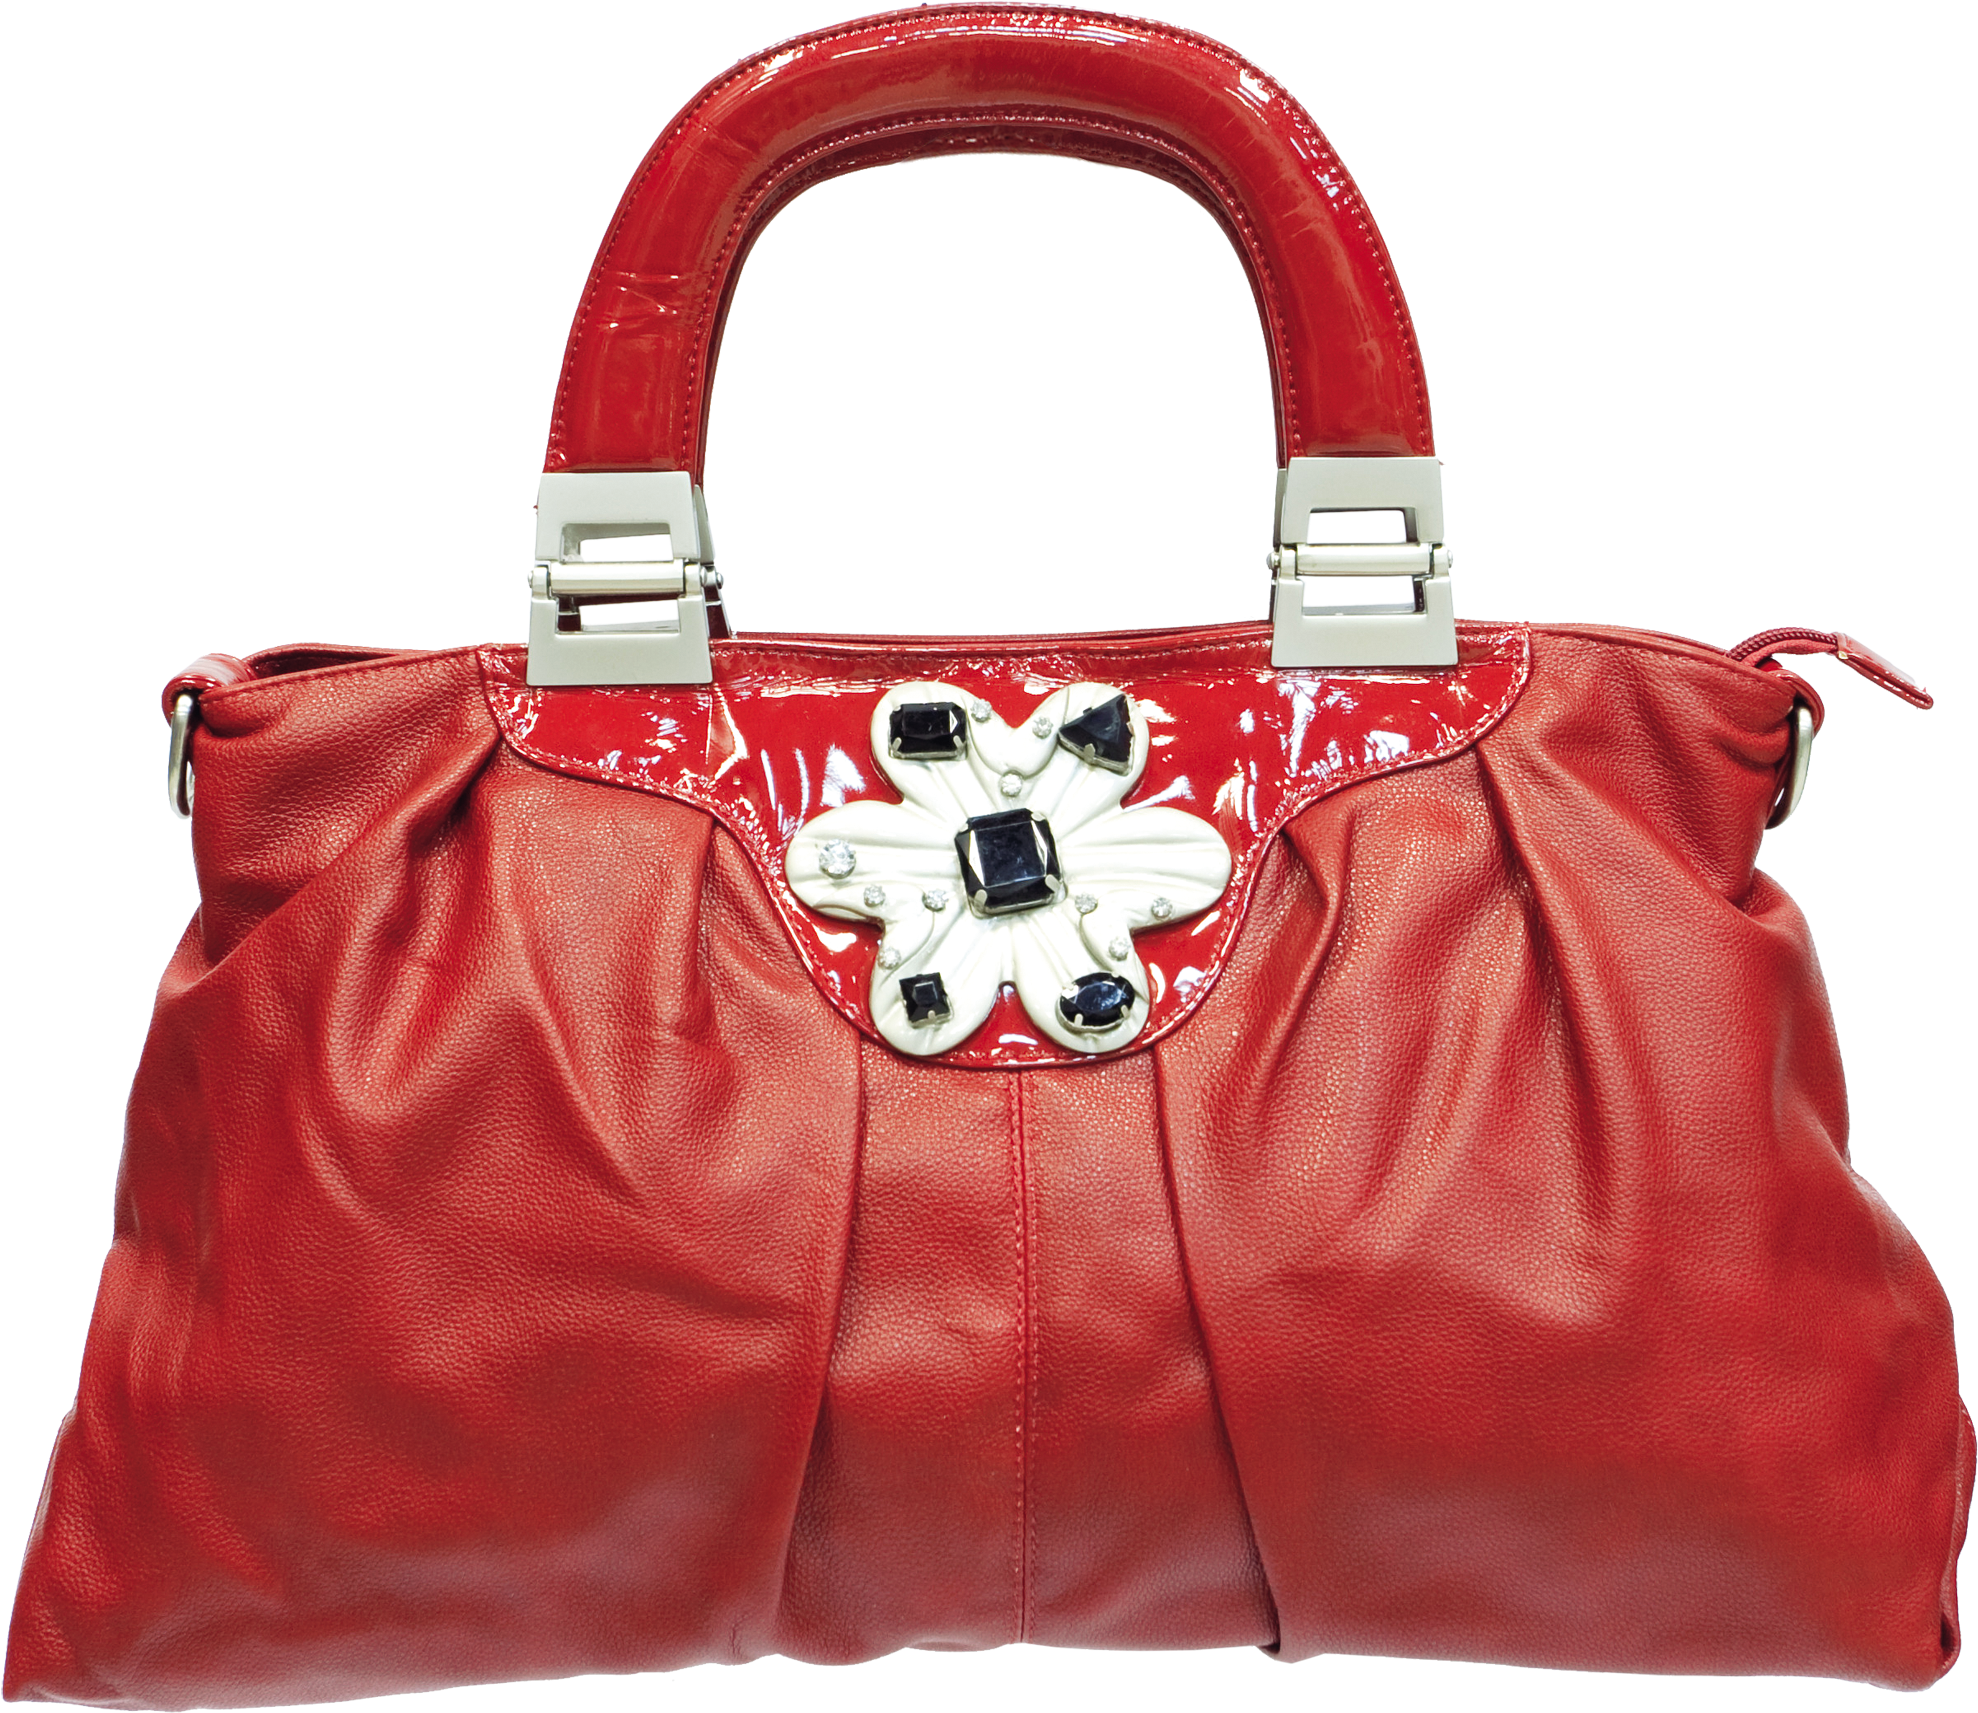 A Red Purse With A Black Background